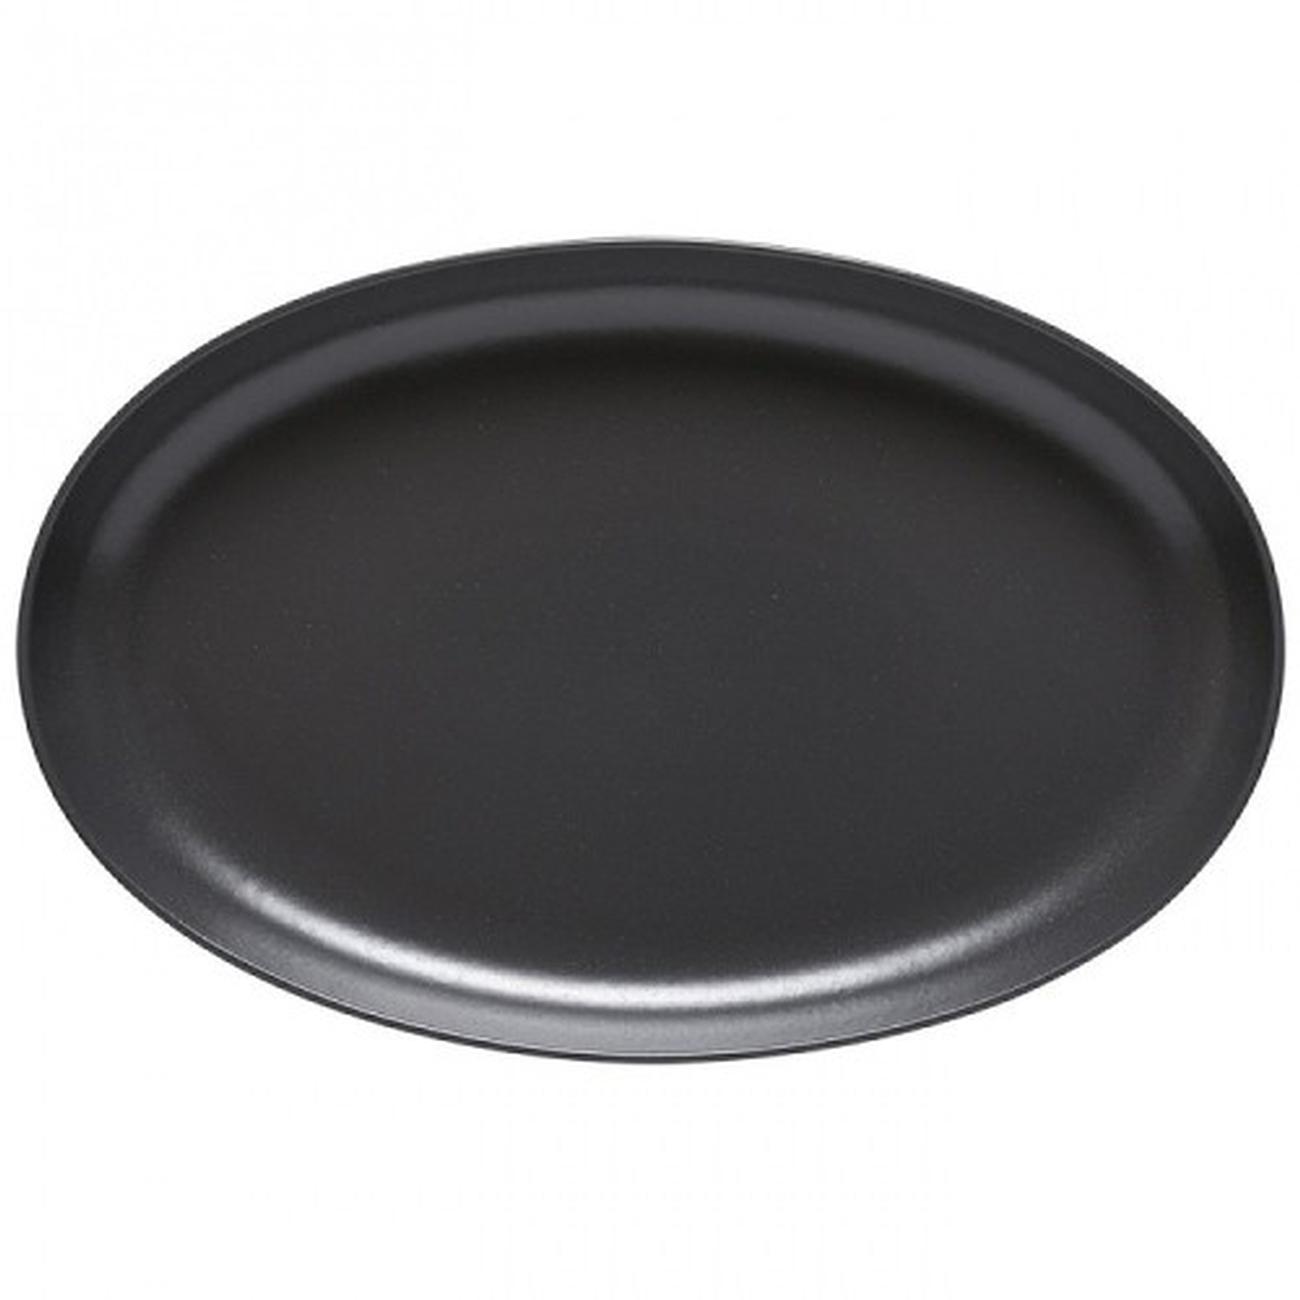 casafina-pacifica-oval-platter-41cm-seed-grey - Pacifica Seed Grey Oval Platter 41cm